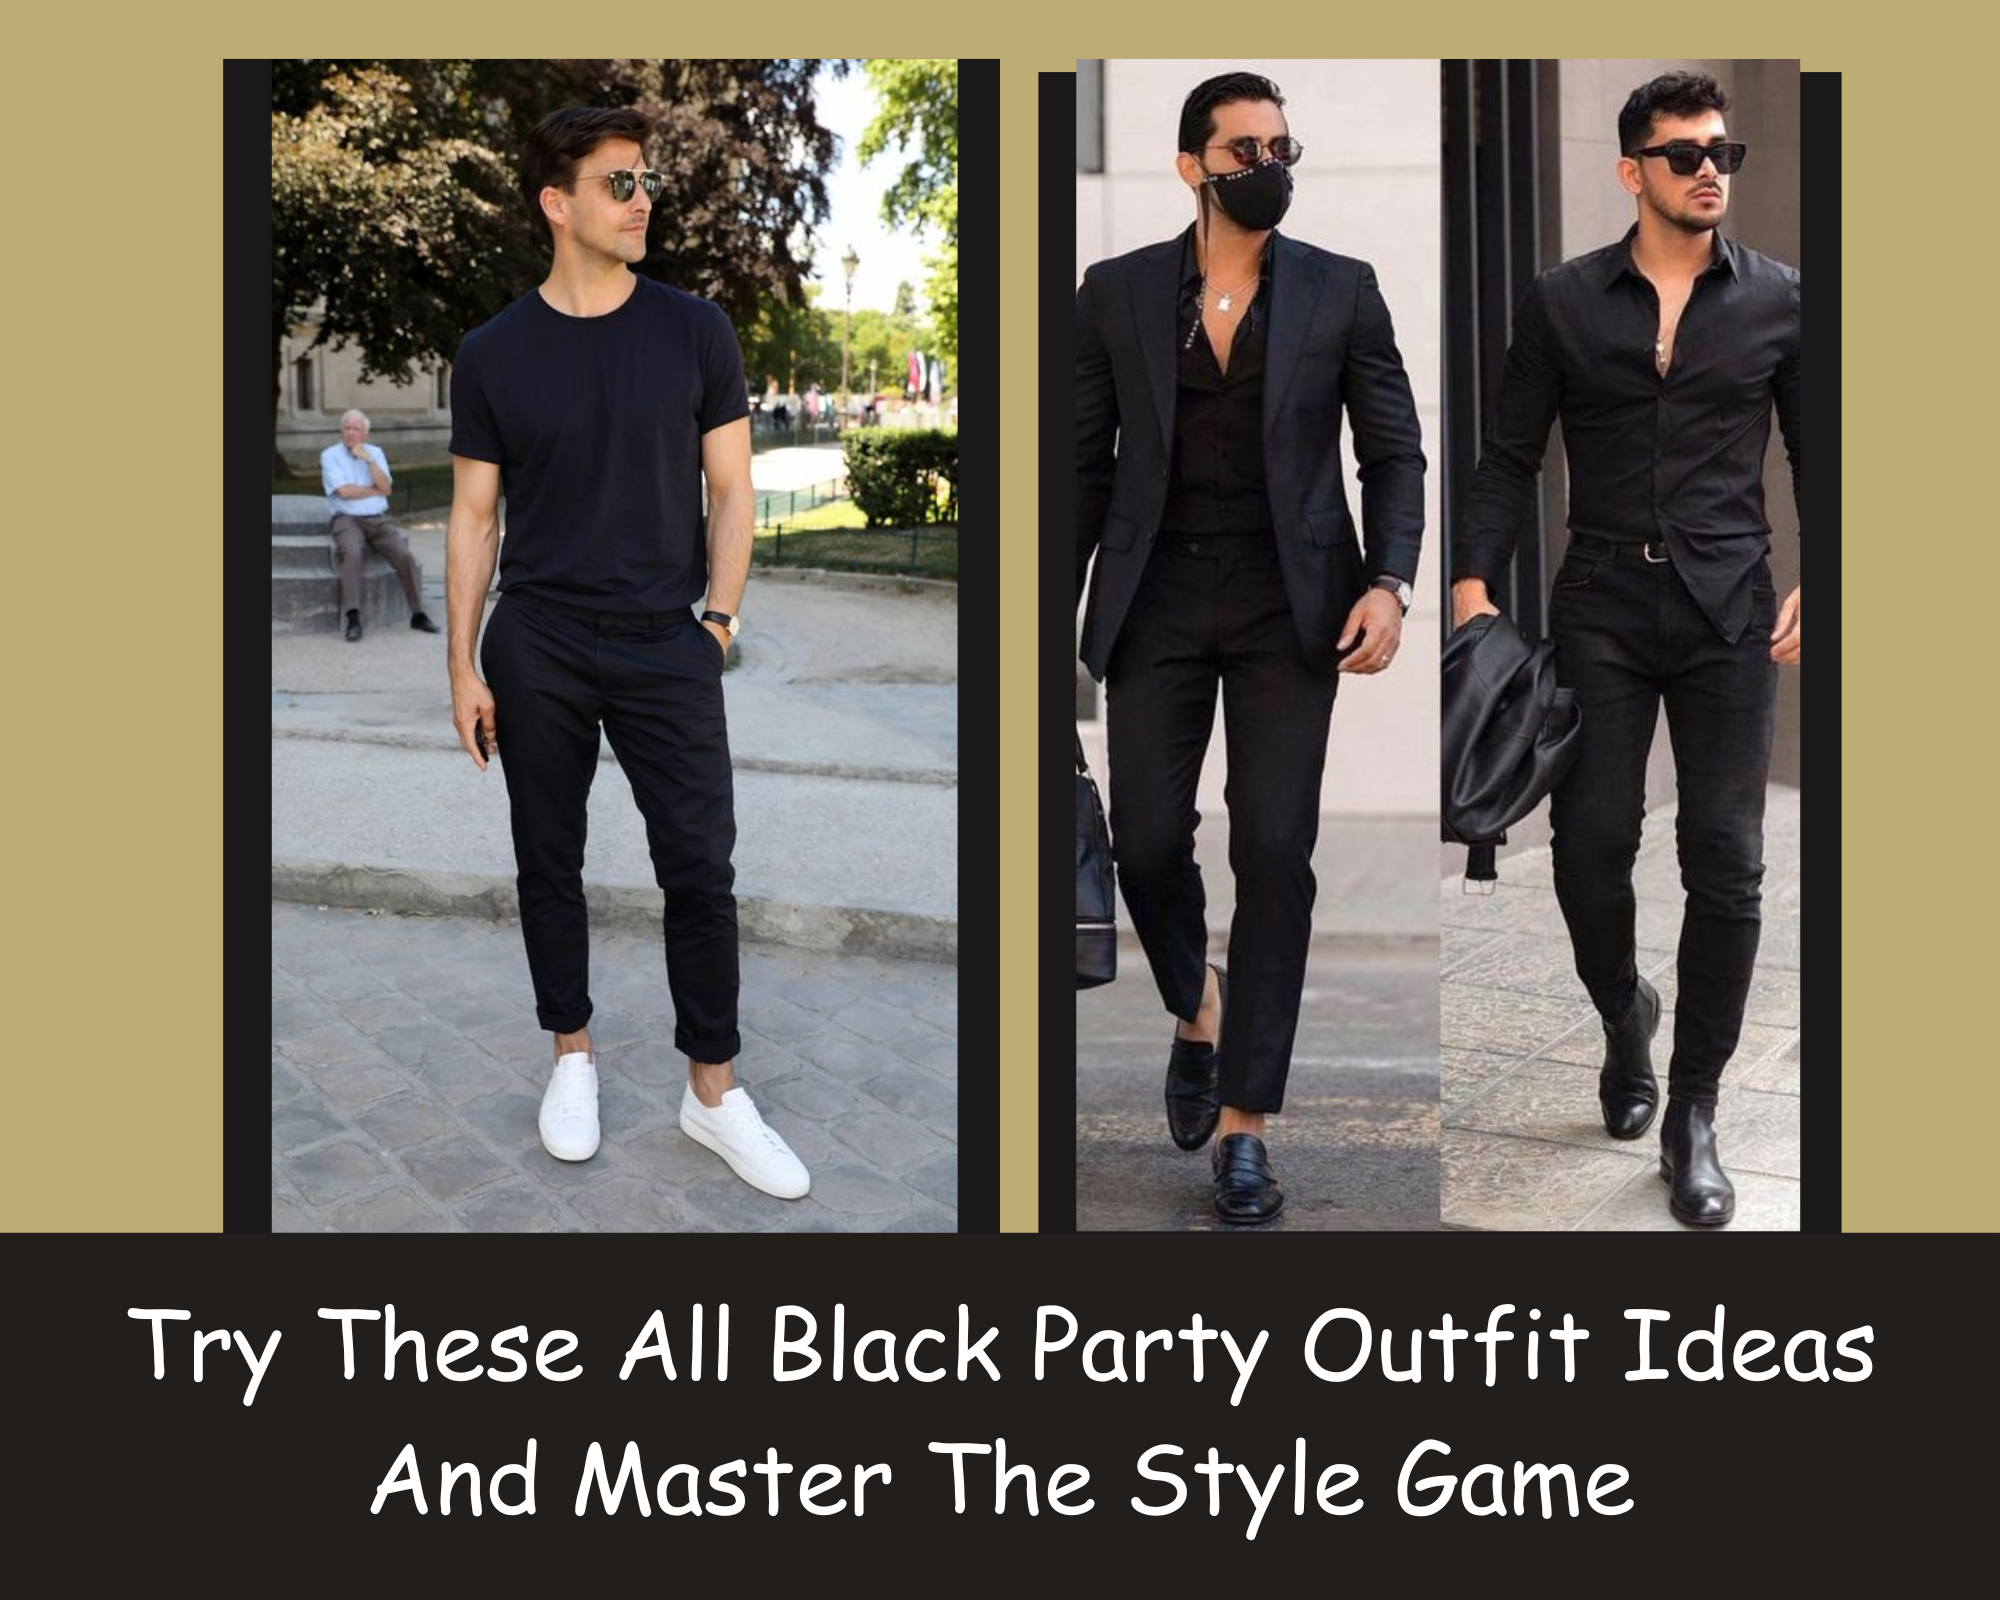 Dominate the Party Scene with These All Black Outfit Ideas